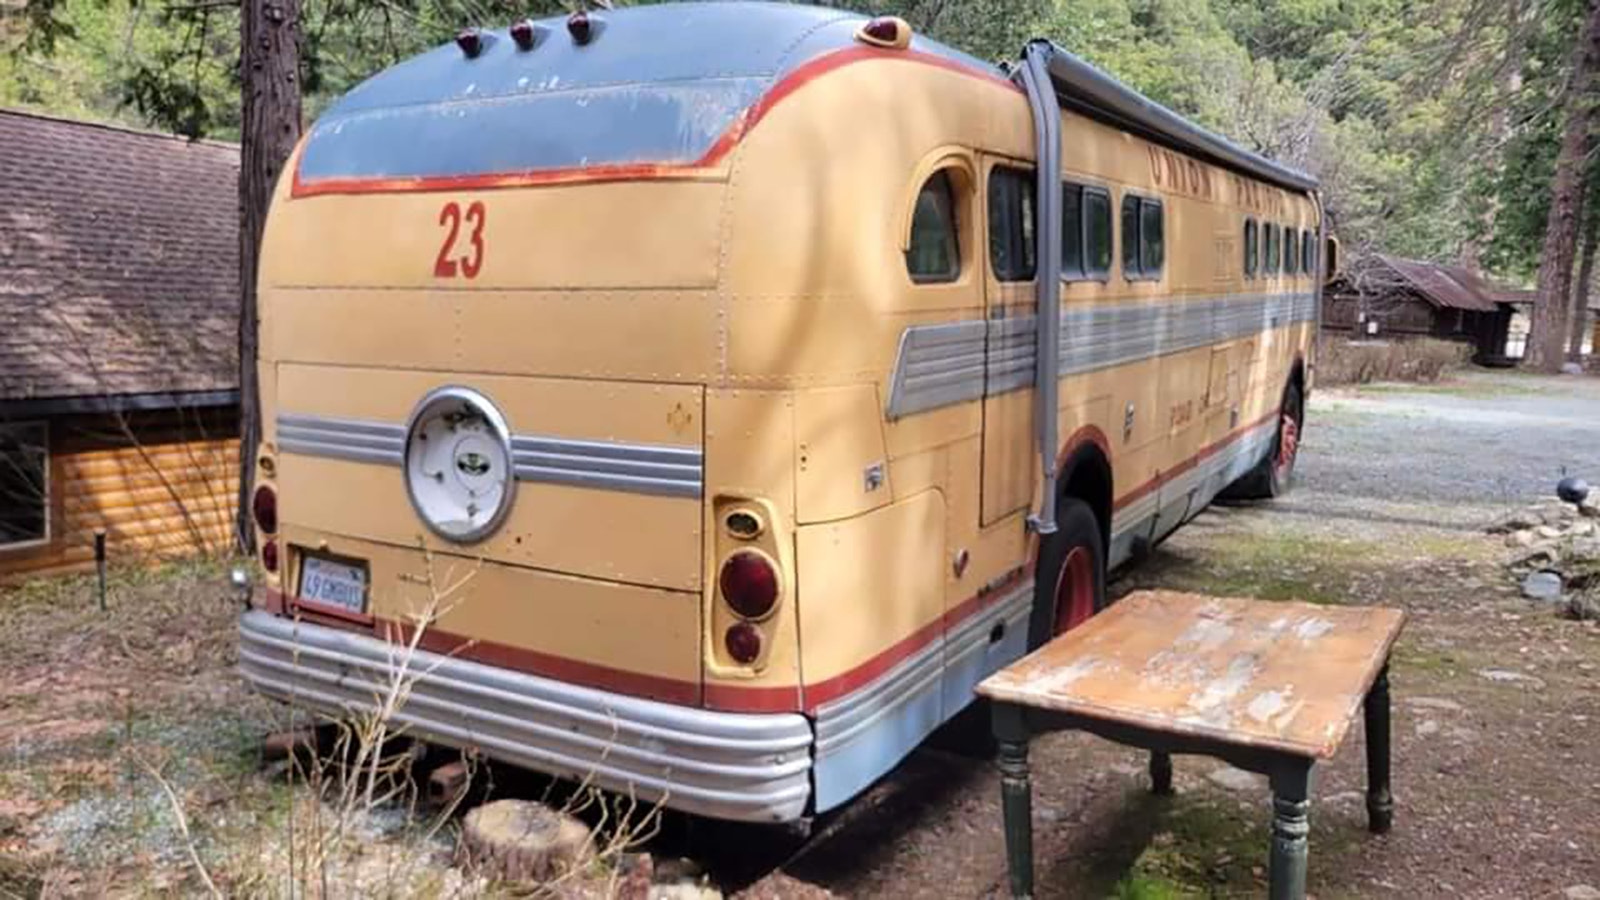 Union Pacific bus No. 23 has lost its iconic UP round logo from the back, which new owner Michael Pannell said he'll restore.